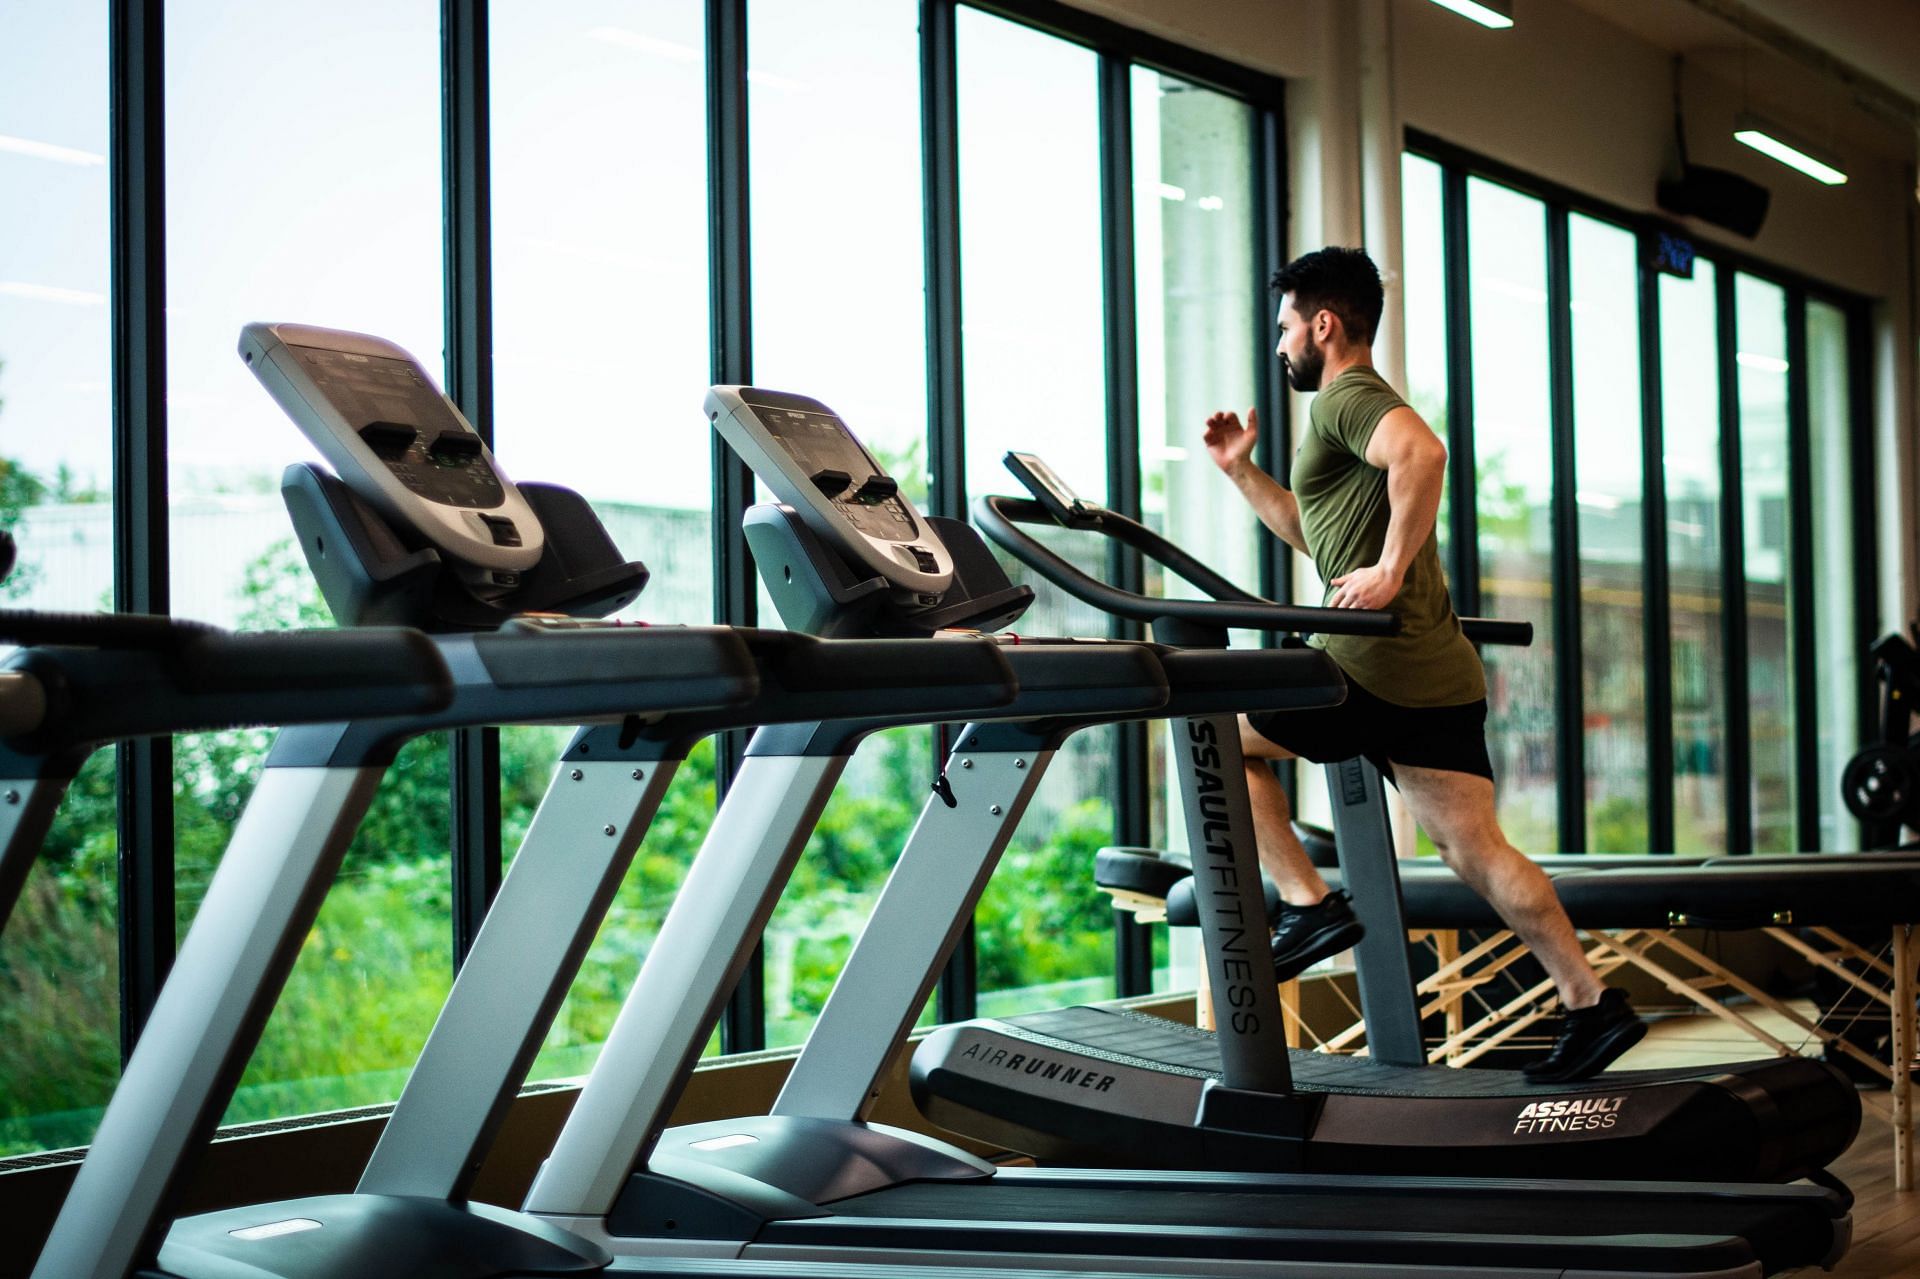 Working out on treadmills can improve your heart rate. (Image via Pexels / William Choquette)